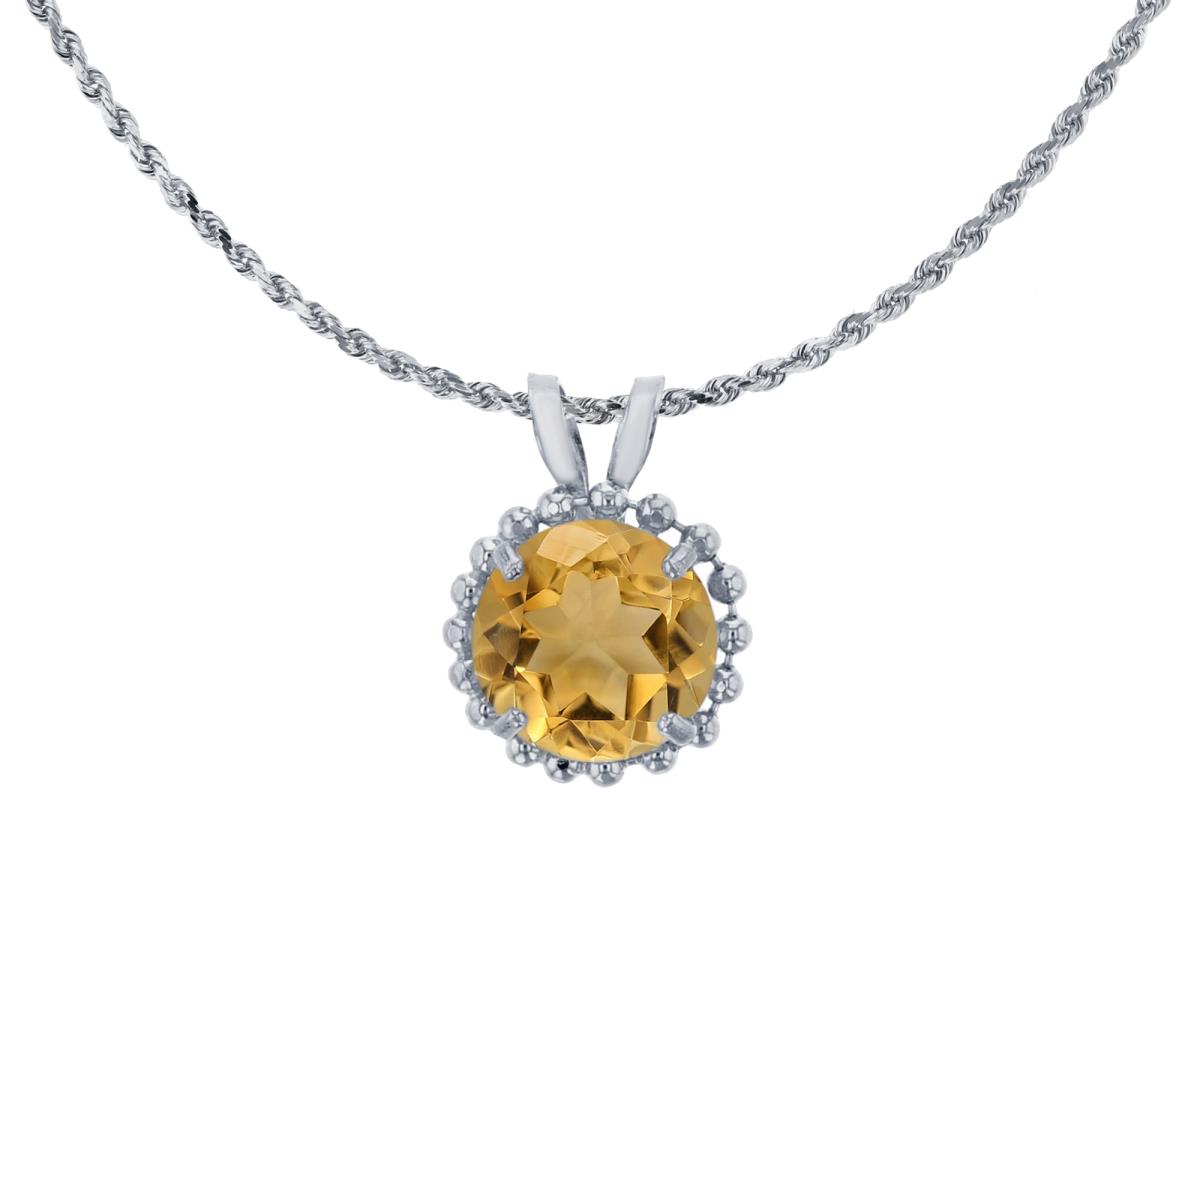 10K White Gold 6mm Rd Cut Citrine with Bead Frame Rabbit Ear 18" Necklace